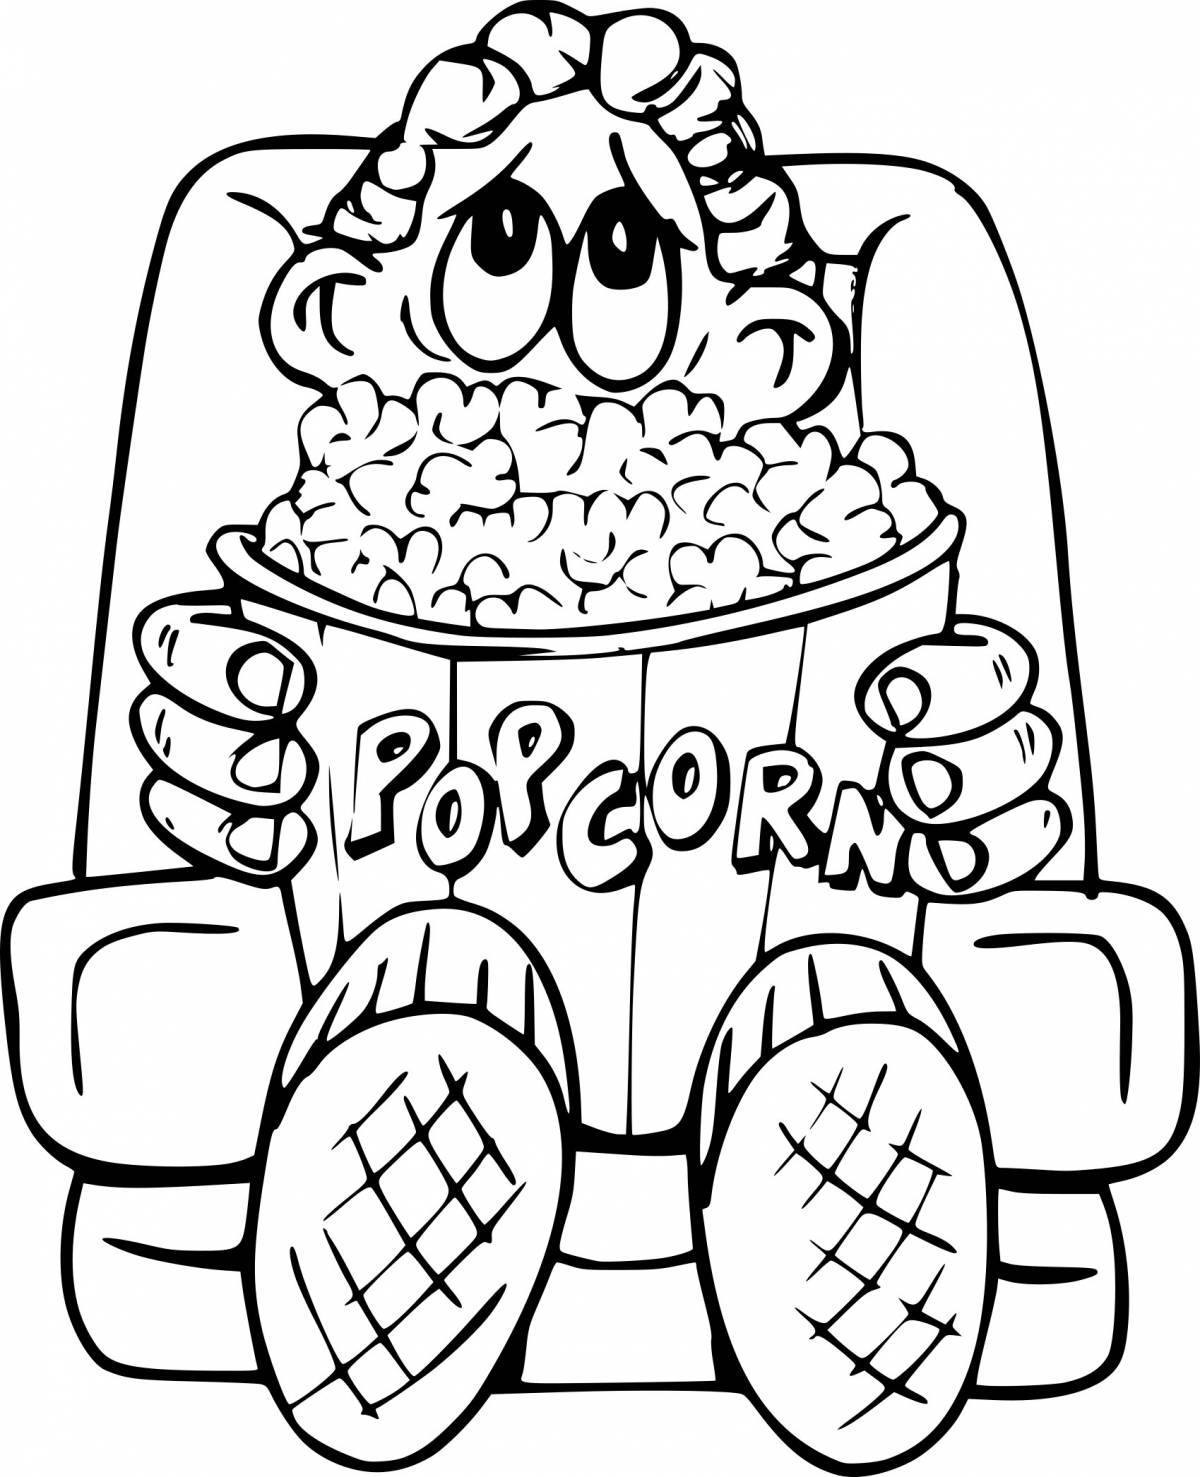 Sweet popcorn coloring page